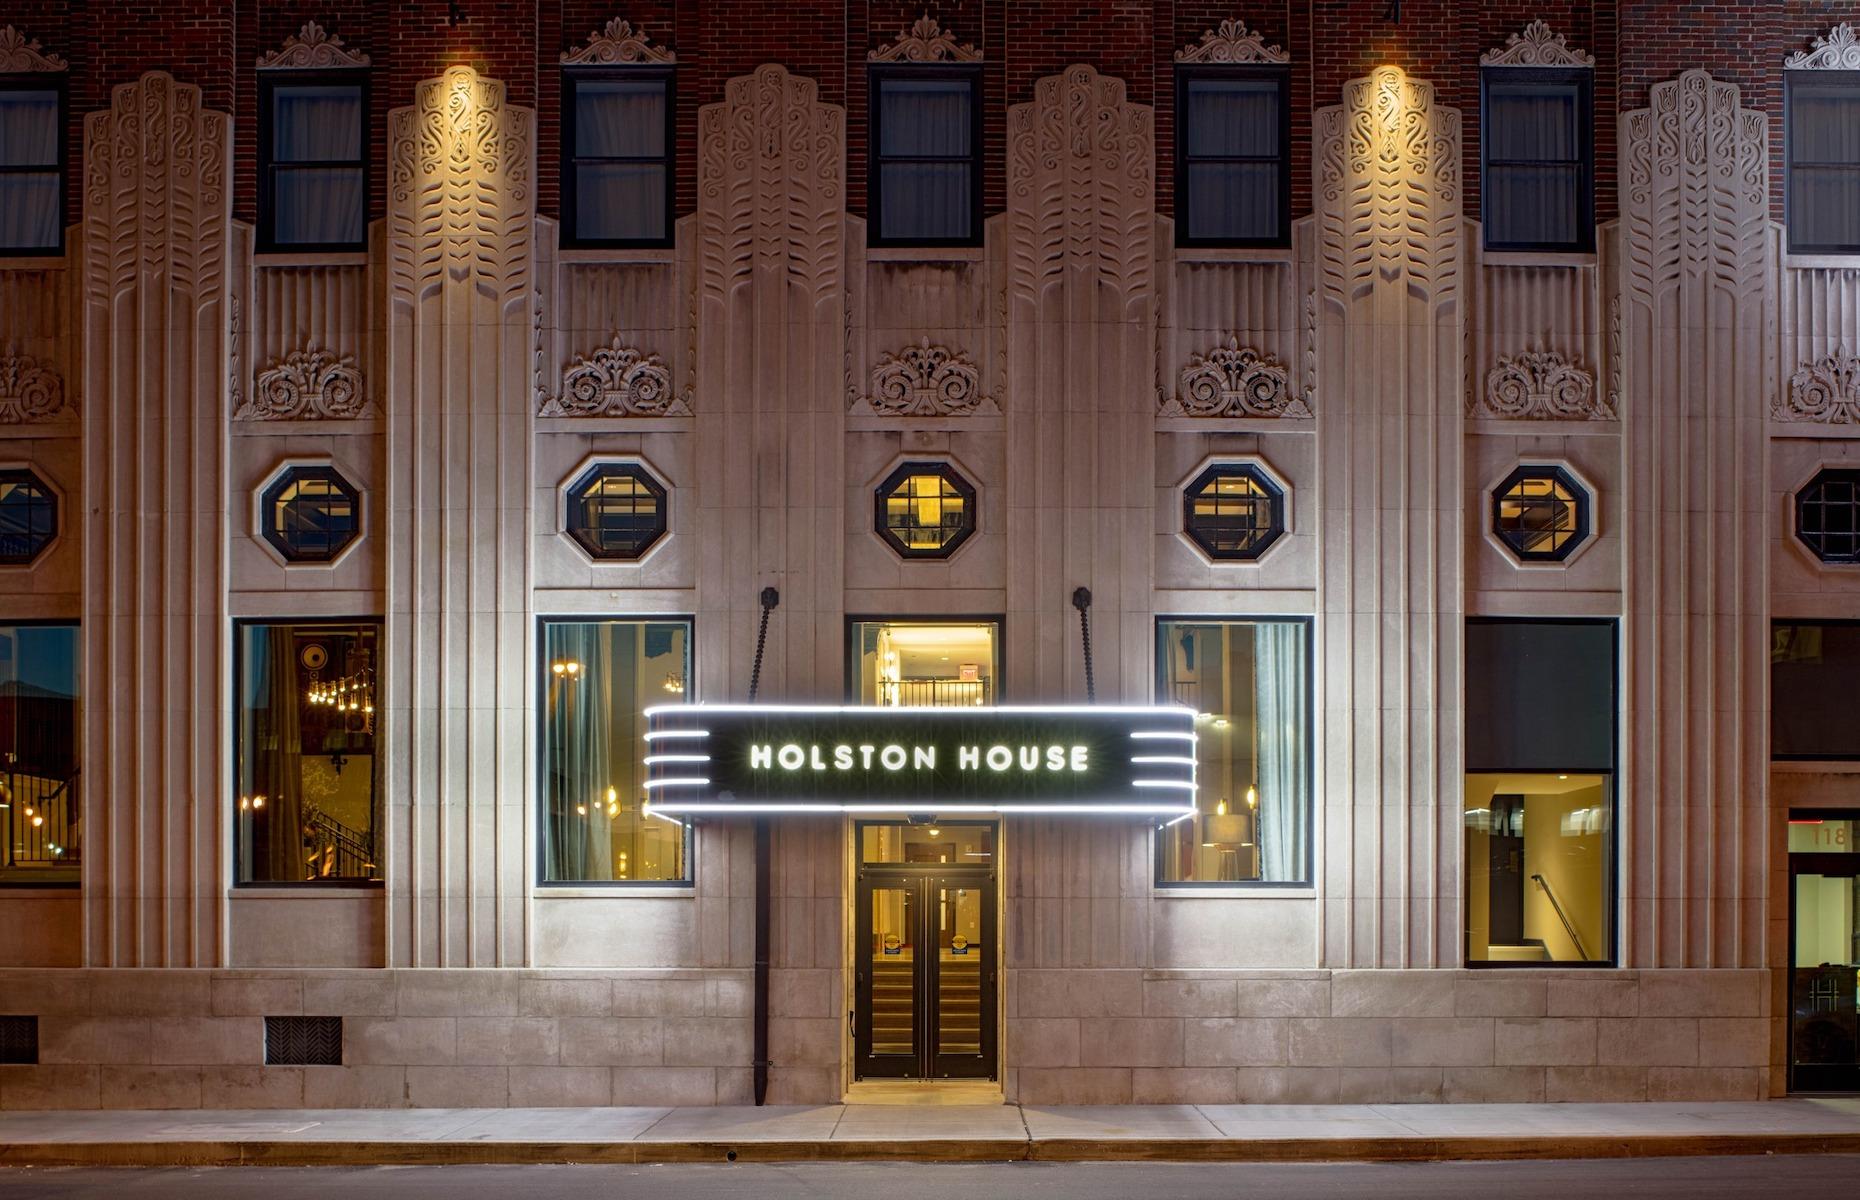 <p>A magnificent Art Deco tower turned contemporary boutique hotel in downtown Nashville, <a href="https://www.hyatt.com/en-US/hotel/tennessee/holston-house-nashville/bnaub">Holston House</a> is bound to be a hit. The building, which is a fabulous showcase for the architecture and decor of the 1920s, was completed in 1929 by esteemed local architects Marr and Holman. It originally housed the James Robertson Hotel until it was used as war accommodation in the 1940s and then became apartments. In 2017 Holston House opened as part of the Hyatt group, retaining many period features from the geometric patterns on its limestone facade to its octagon windows and high-ceilinged lobby. Delightful modern additions include a rooftop bar and pool.</p>